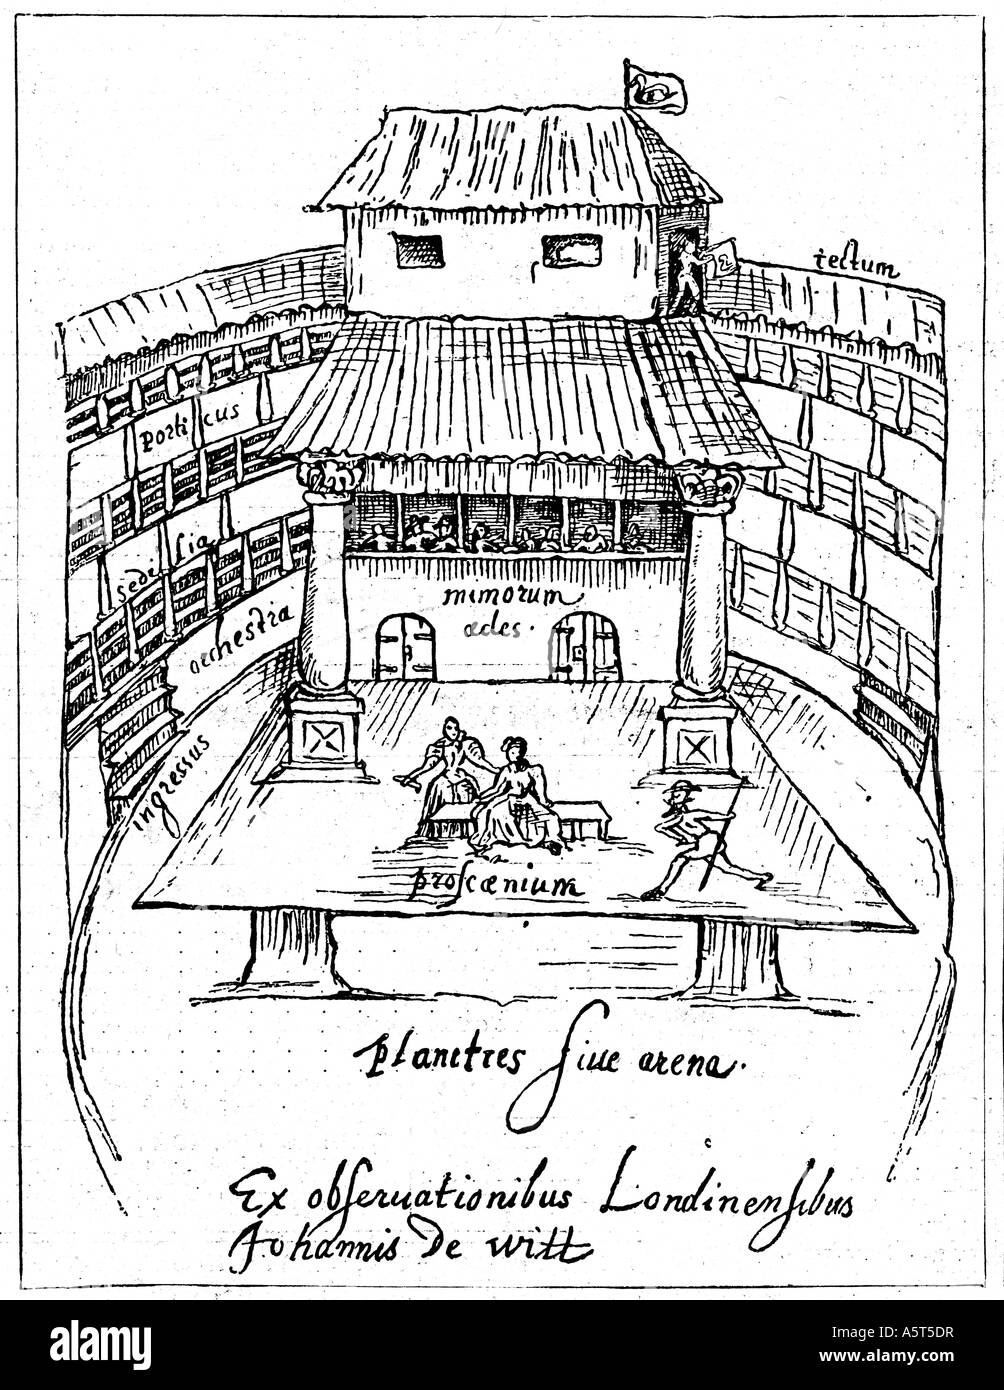 Swan Theatre 1596 sketch by Johannes de Witt the Bankside theatre only contemporary drawing of an Elizabethan playhouse interior Stock Photo